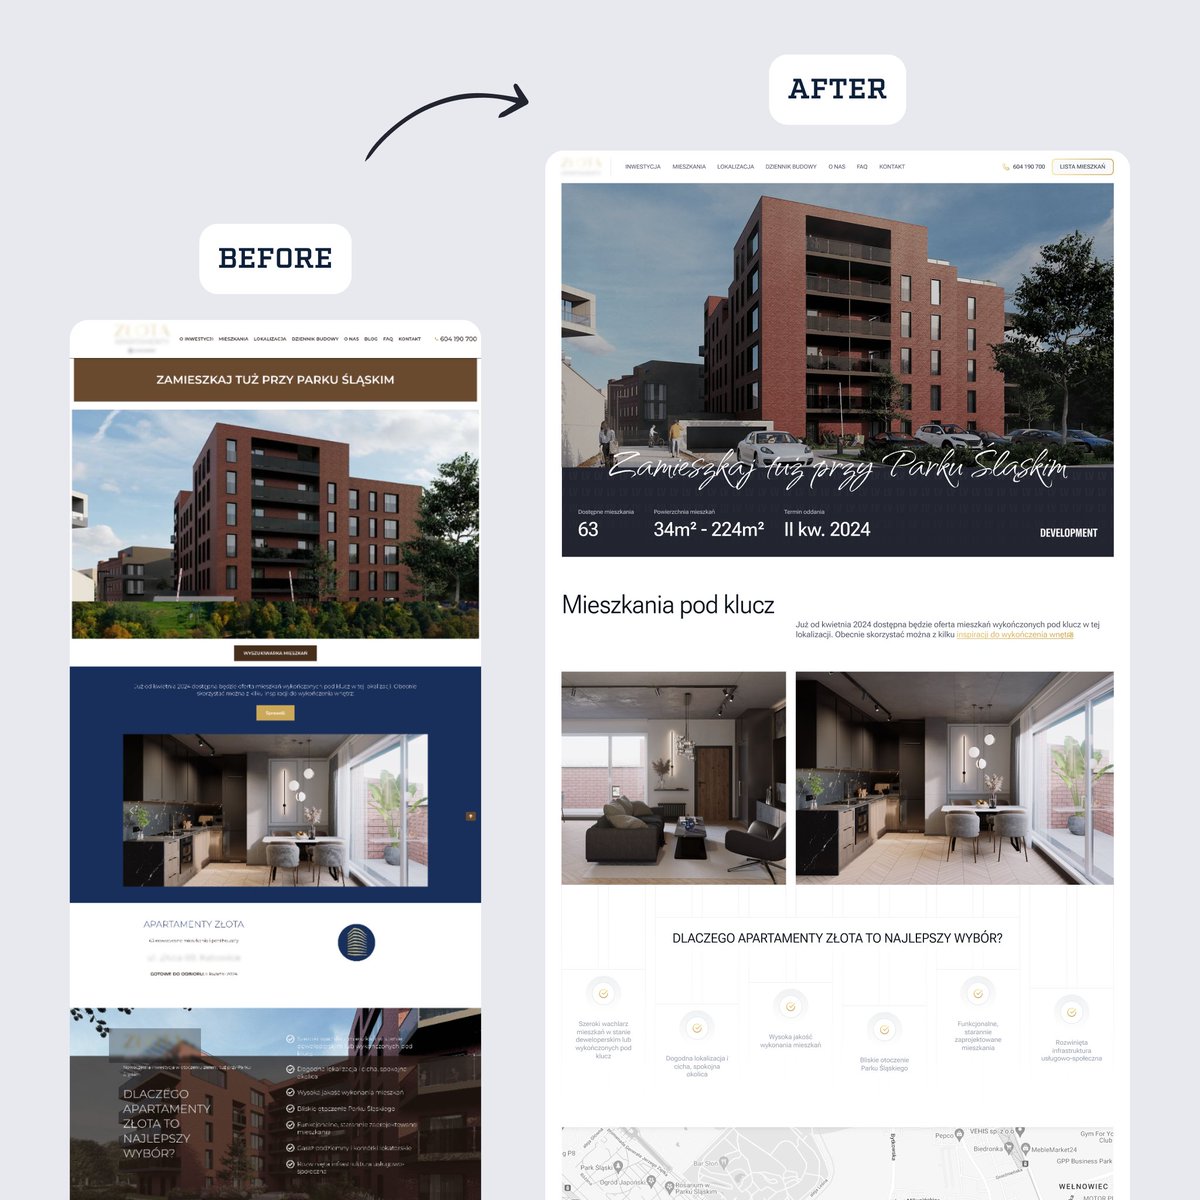 Which one is better?

Another Real Estate landing page 🏠 

Before → After